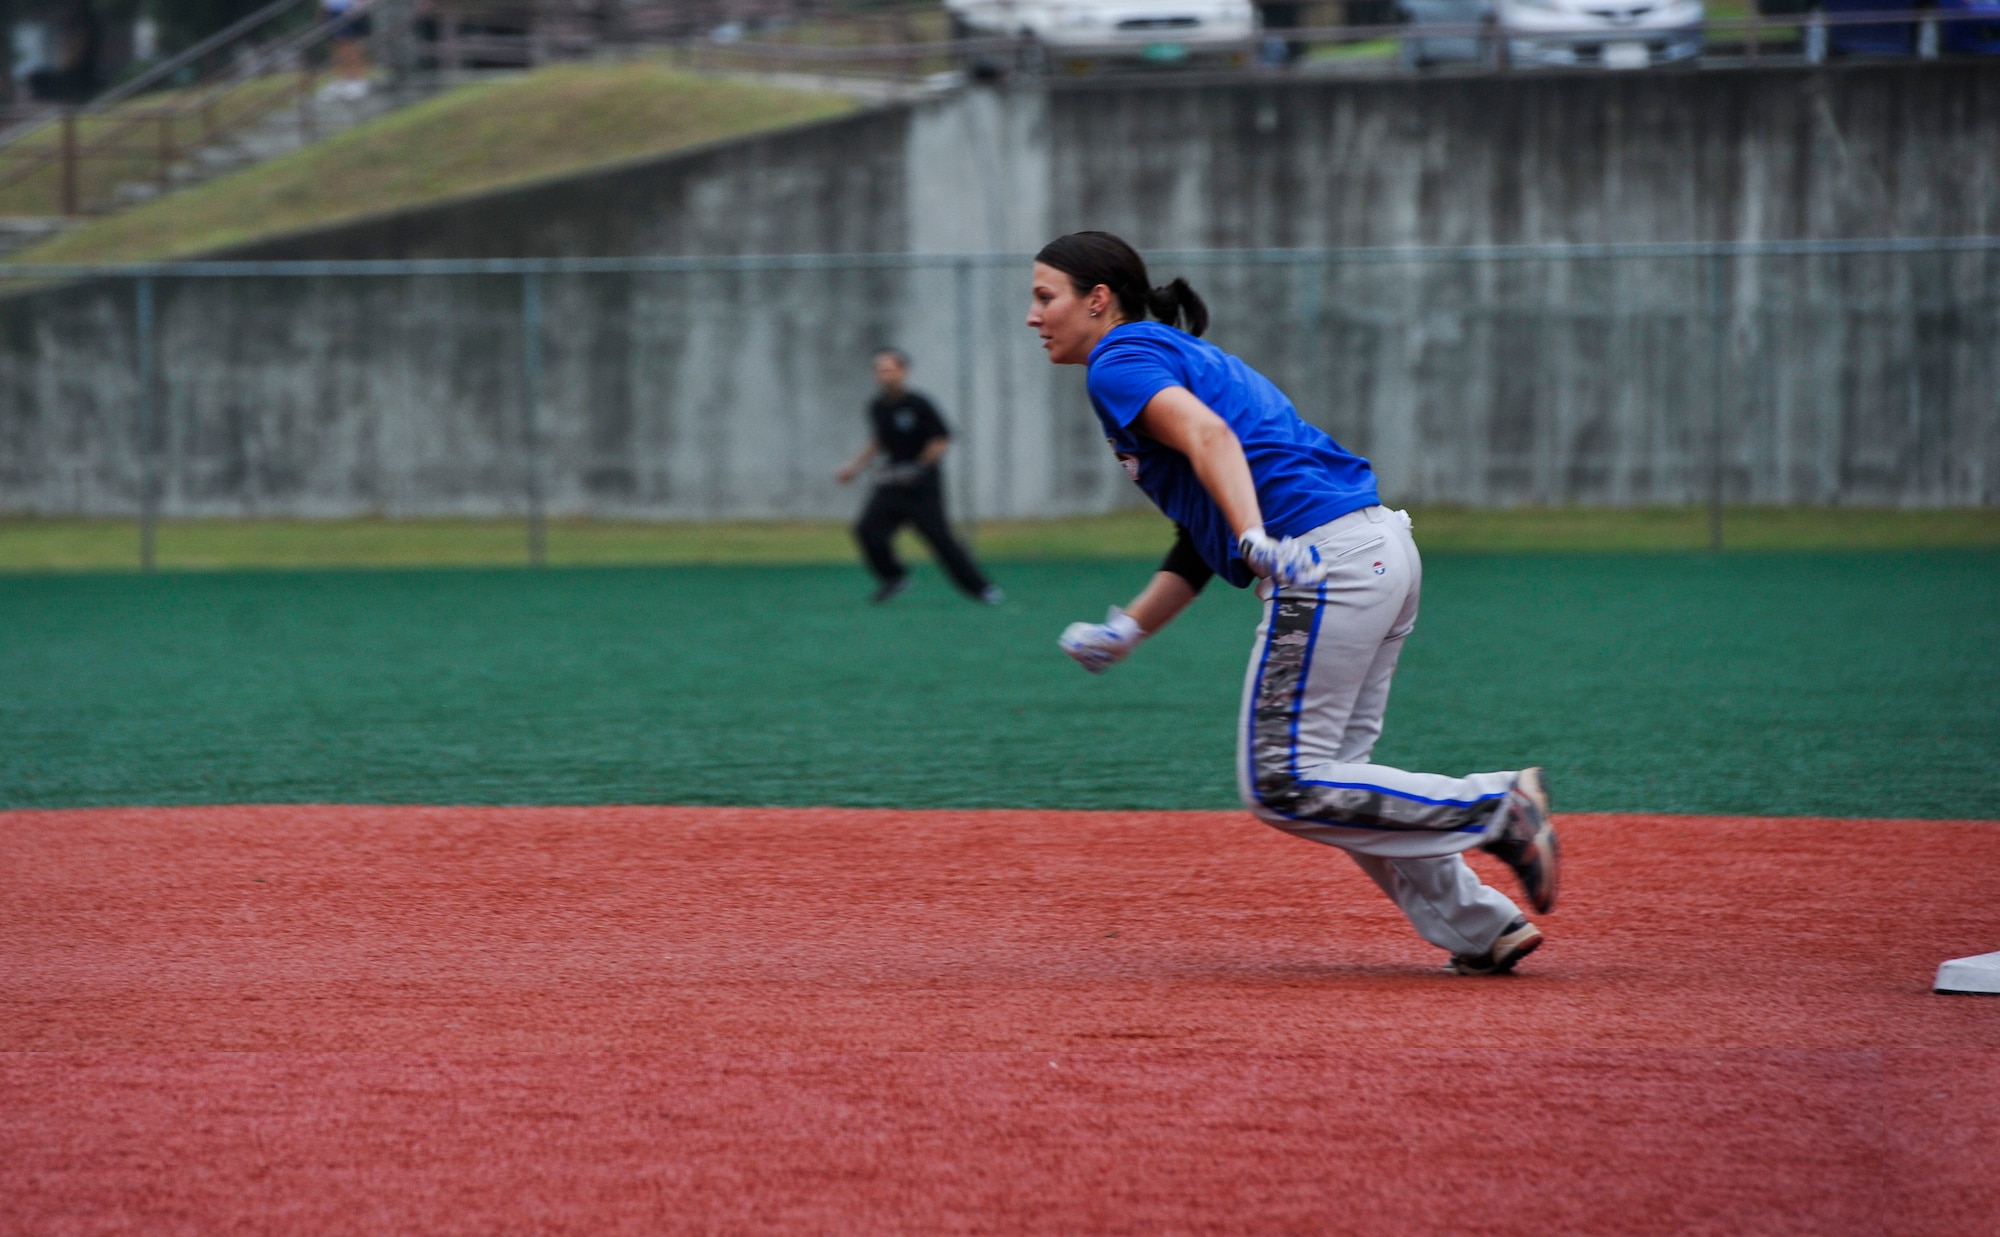 Senior Airman Amber Devlin, 694th Intelligence, Surveillance and Reconnaissance Group program manager, runs to third base during the fifth inning of a softball game against the 3rd Battlefield Coordination Detachment Sept. 29, 2014, on Osan Air Base, Republic of Korea. Devlin was selected to be a part of the 15-player roster on the Air Force’s Women’s softball team. (U.S. Air Force photo by Senior Airman David Owsianka)